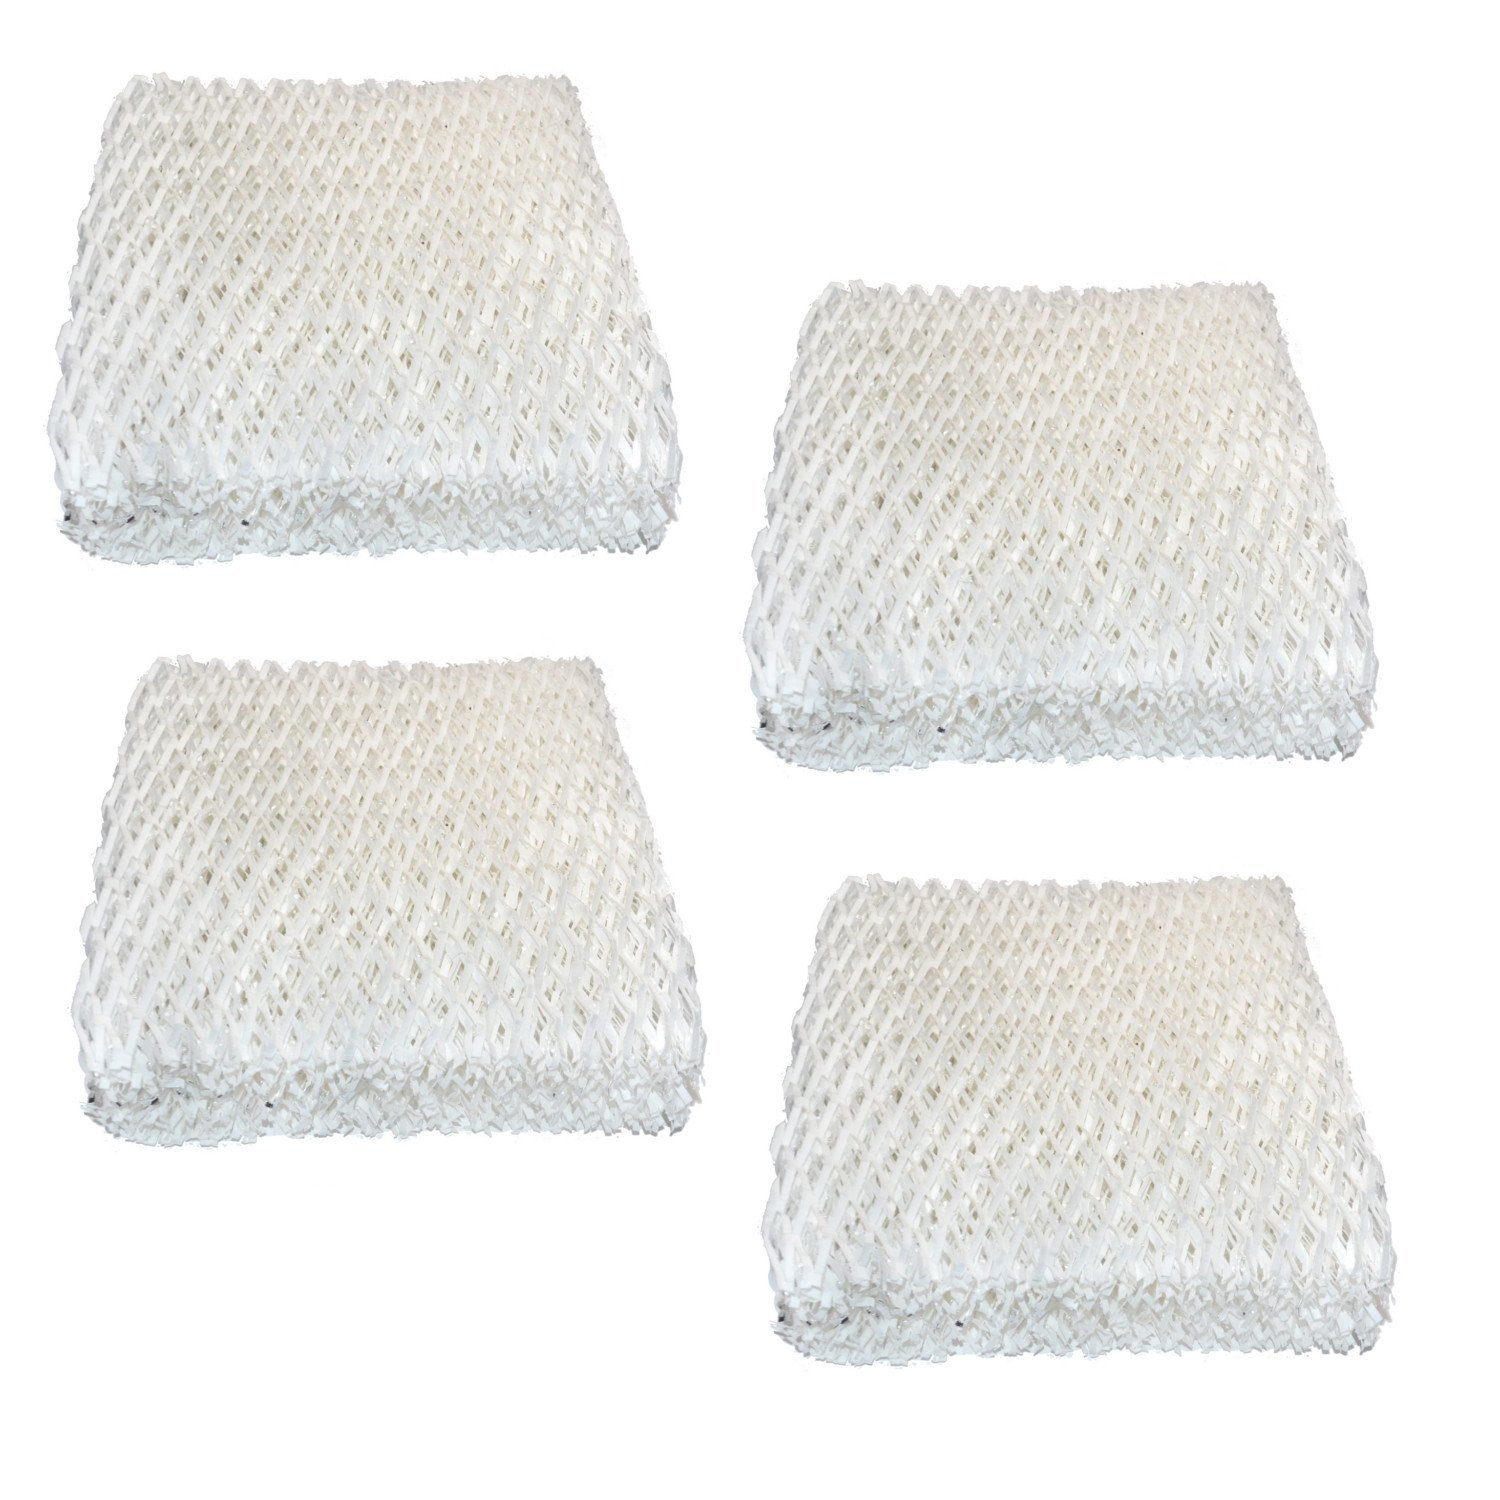 HQRP Pack of 4 Humidifier Wick Filters for Honeywell HAC-500 fits Honeywell HCM-3000 / HCM-3003 Humidifiers 